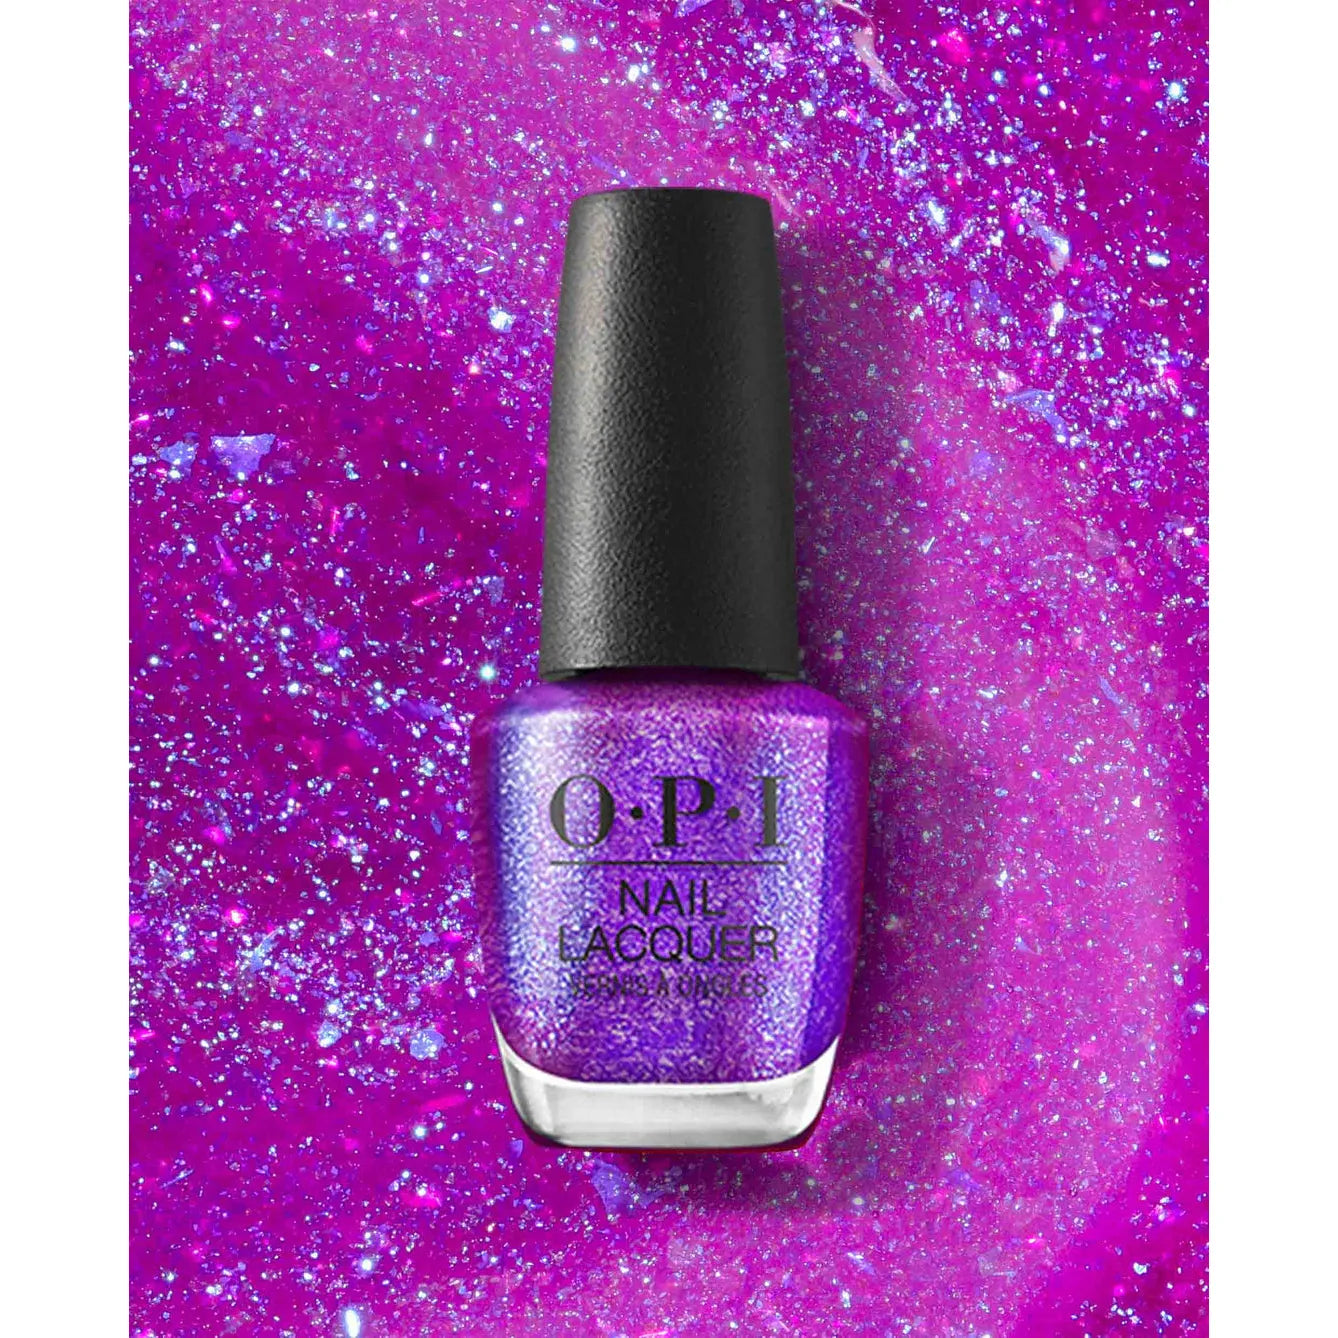 OPI Nail Lacquers - Feelin’ Libra-ted #H020 (Clearance)